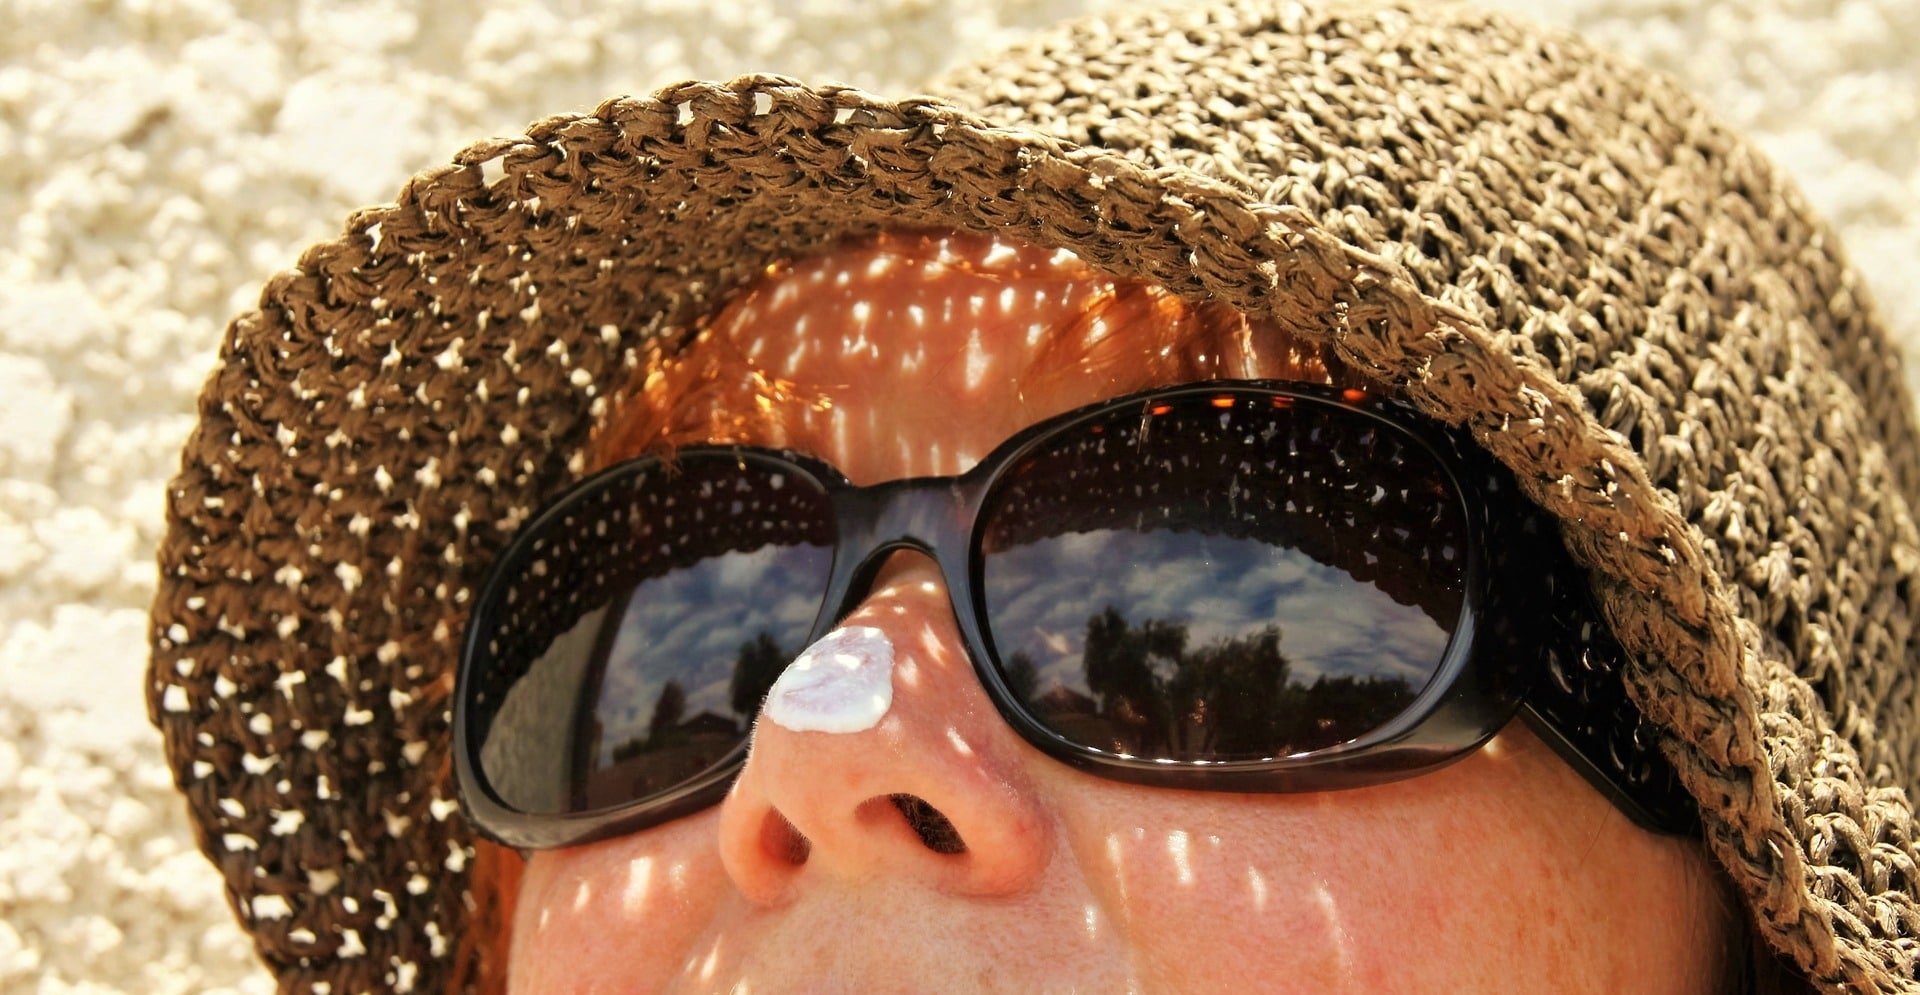 Woman in hat wearing sunglasses with sunscreen on nose